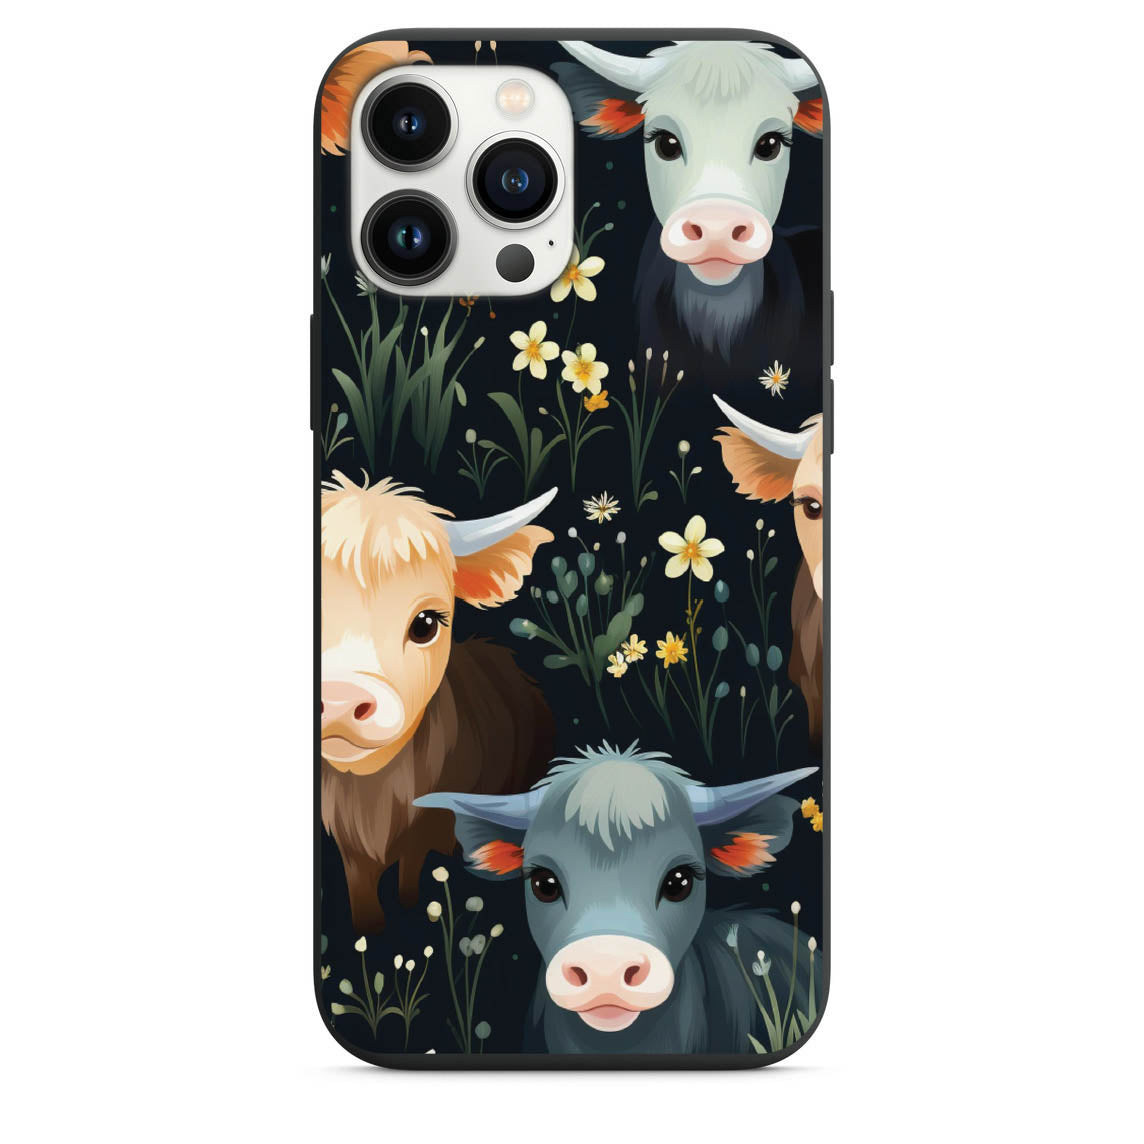 Cute Cows And Flower Pattern Phone Case for iPhone 7 8 X XS XR SE 11 12 13 14 Pro Max Mini Note 10 20 s10 s10s s20 s21 20 Plus Ultra